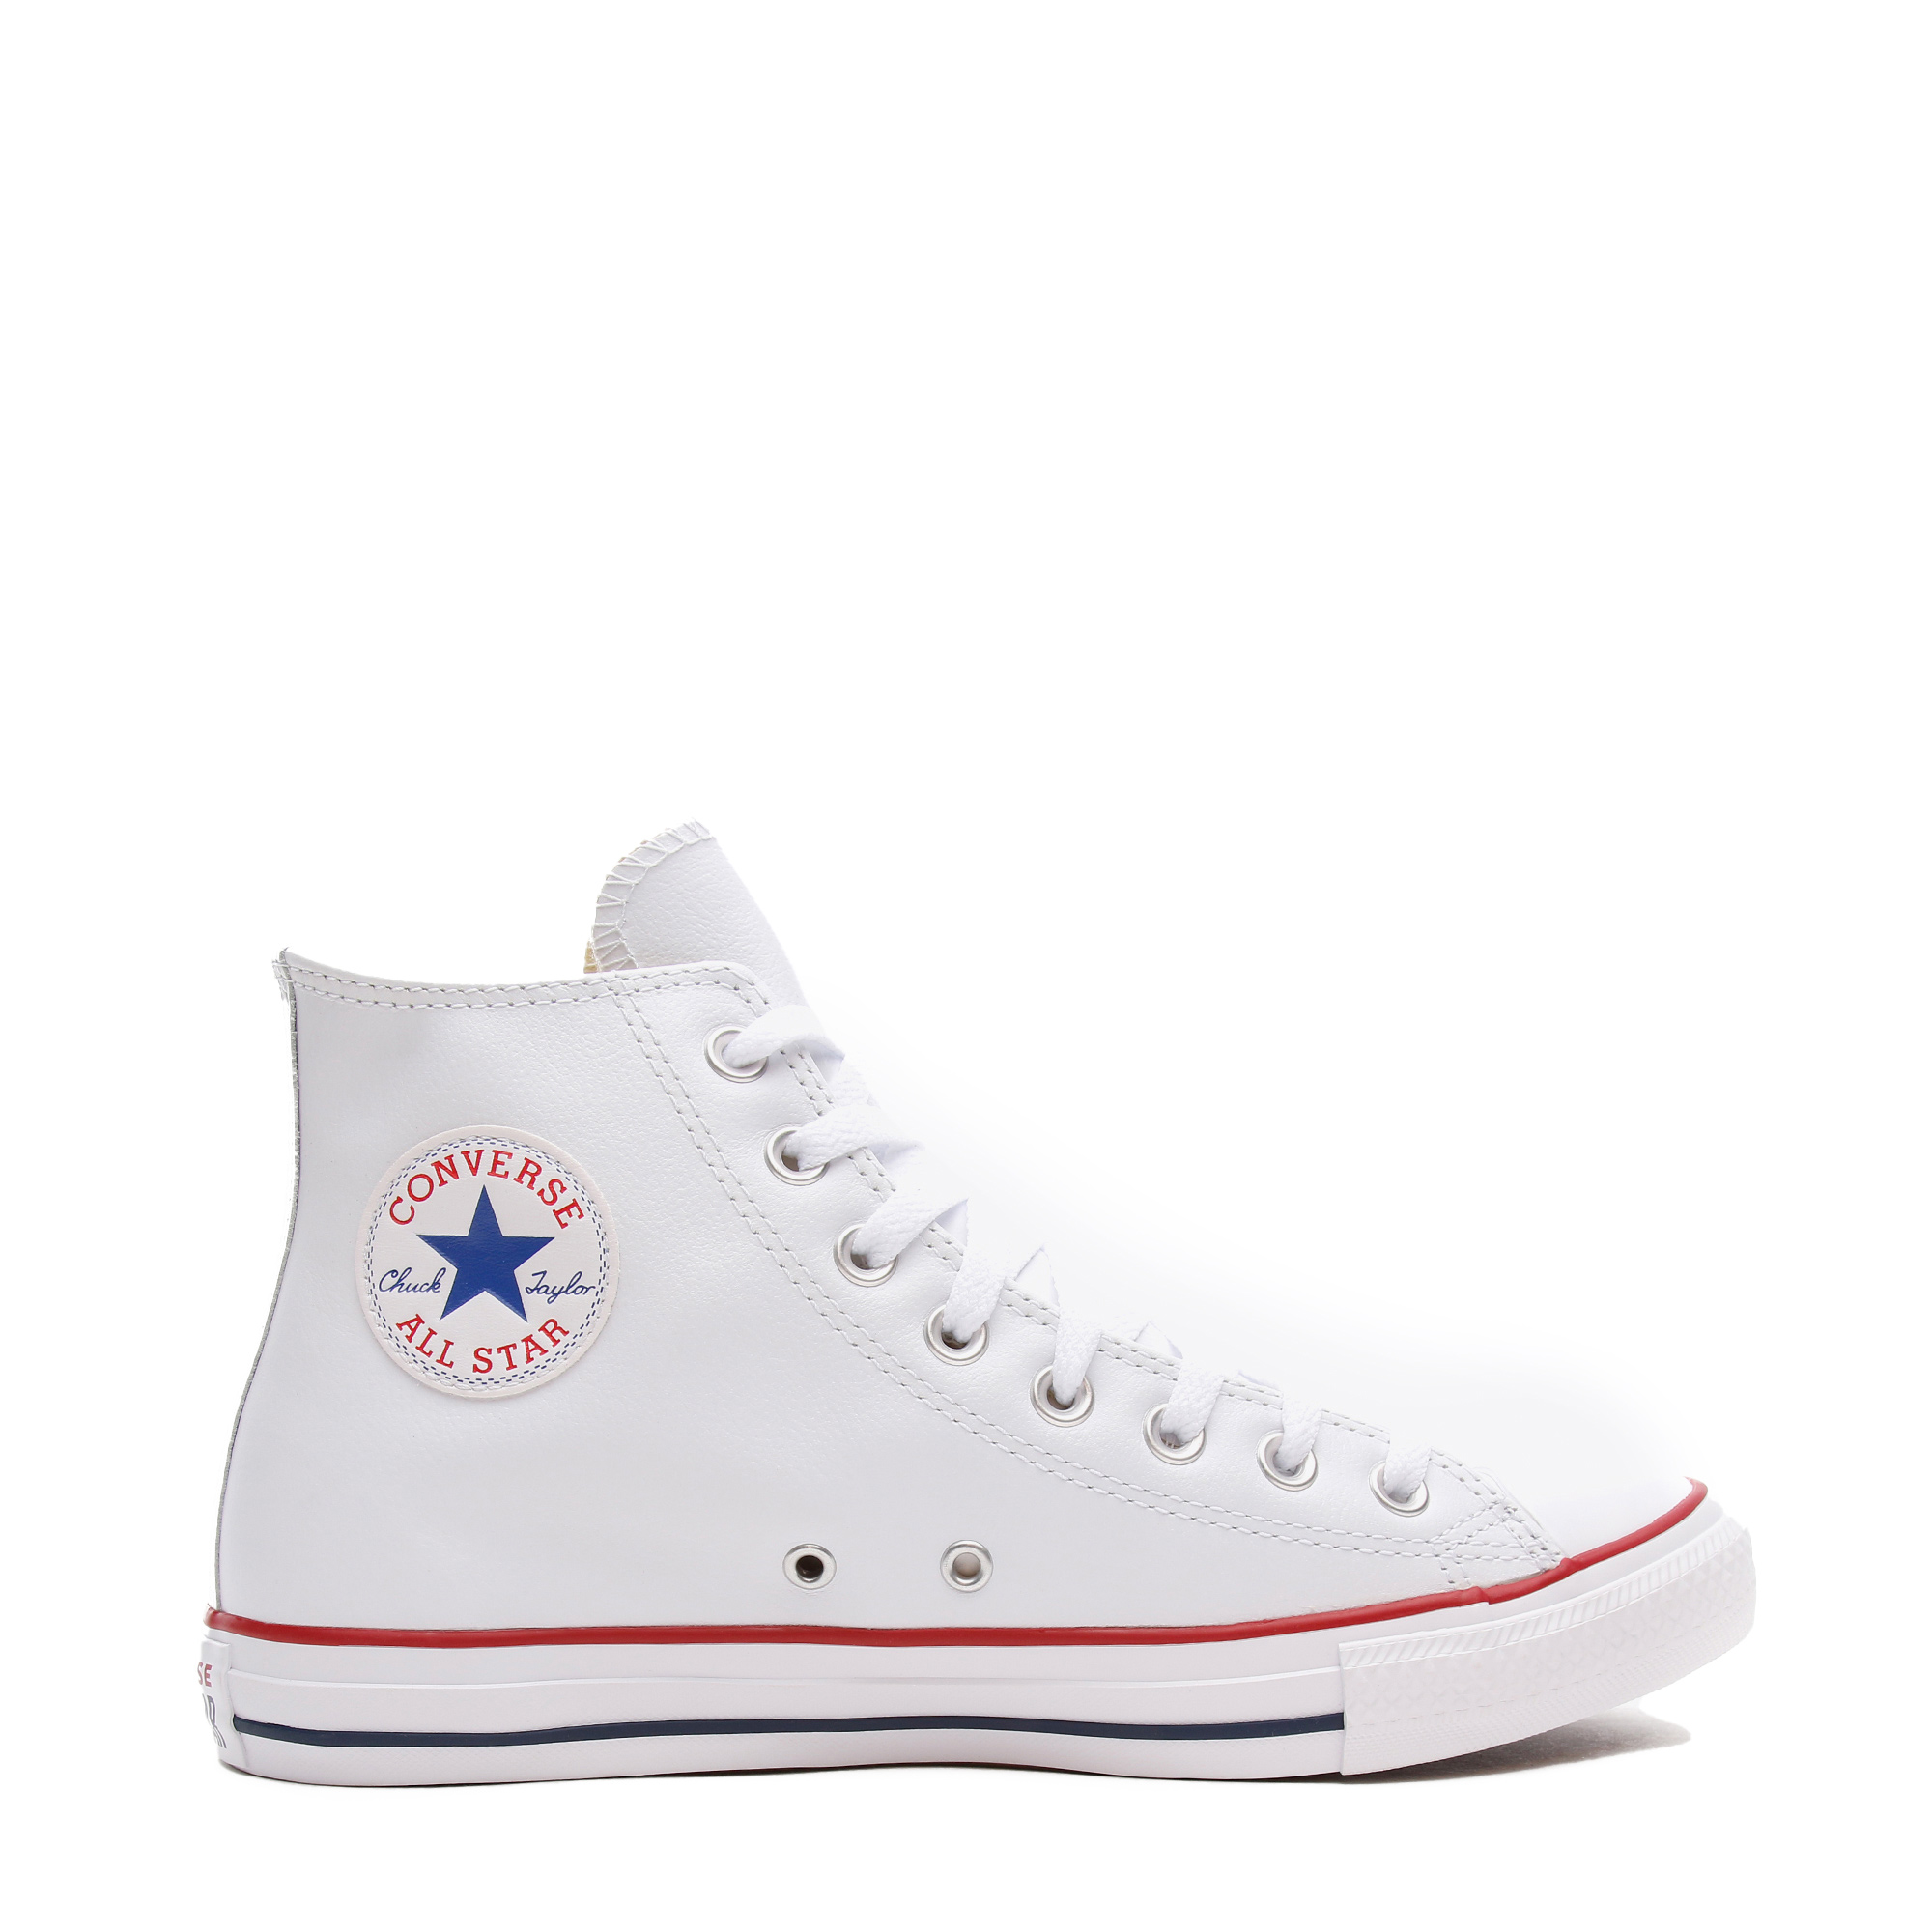  Chuck Taylor All Star Leather